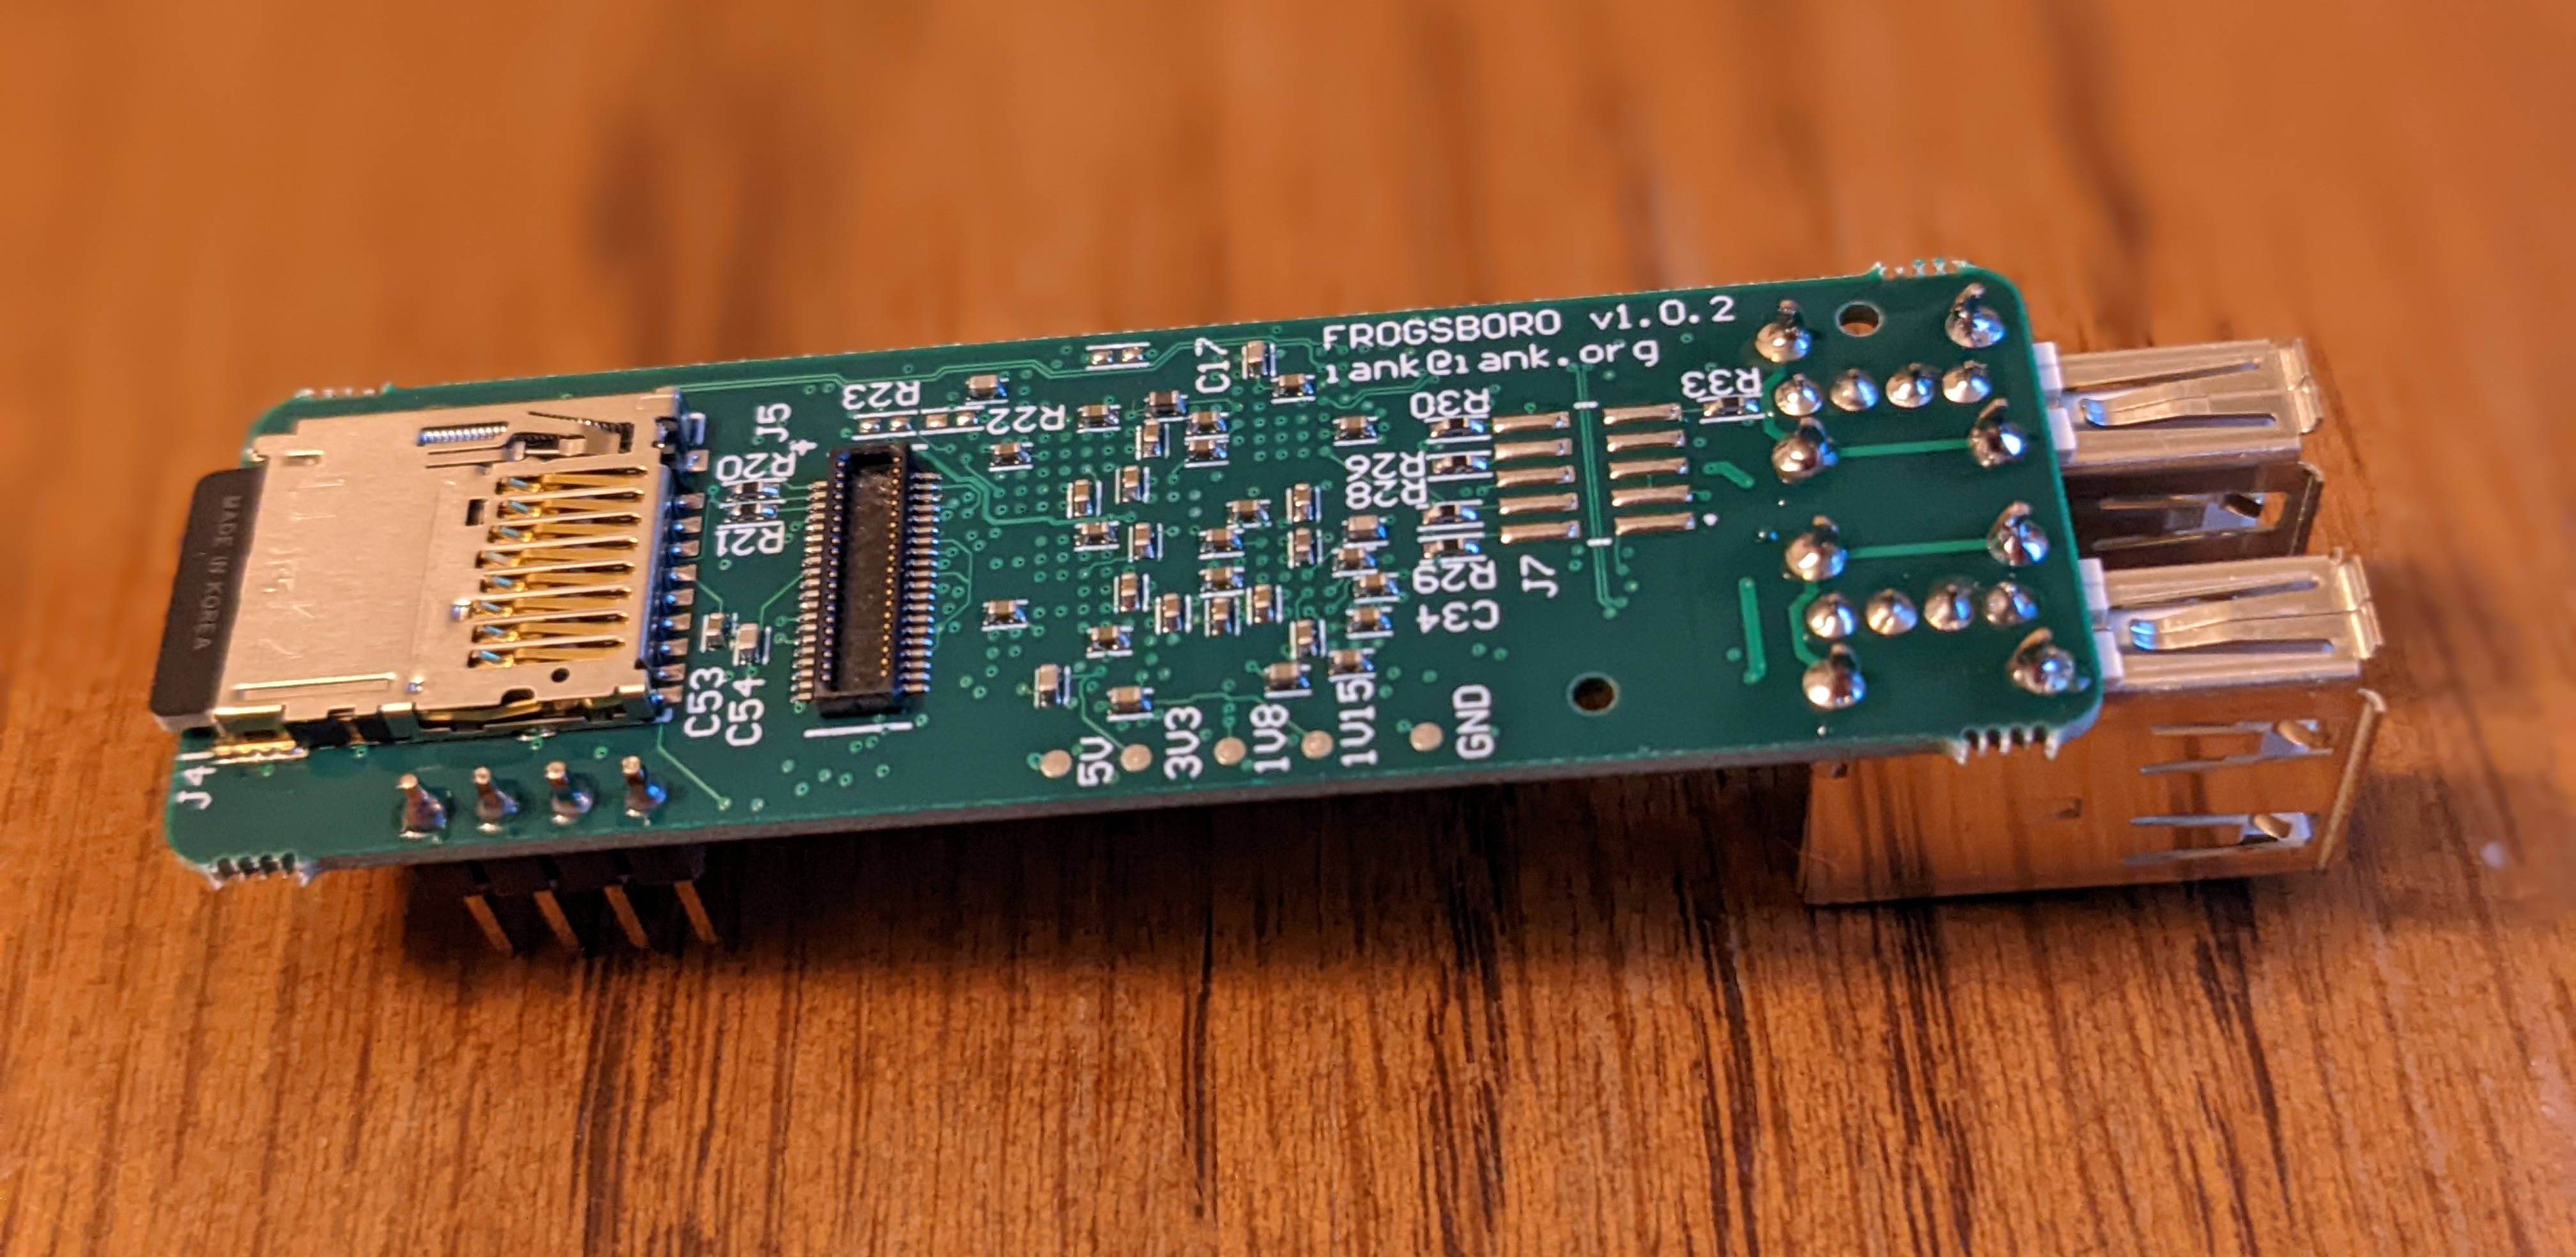 There is a microSD card connector on one end and a 40-pin low-profile board-to-board connector nearby.